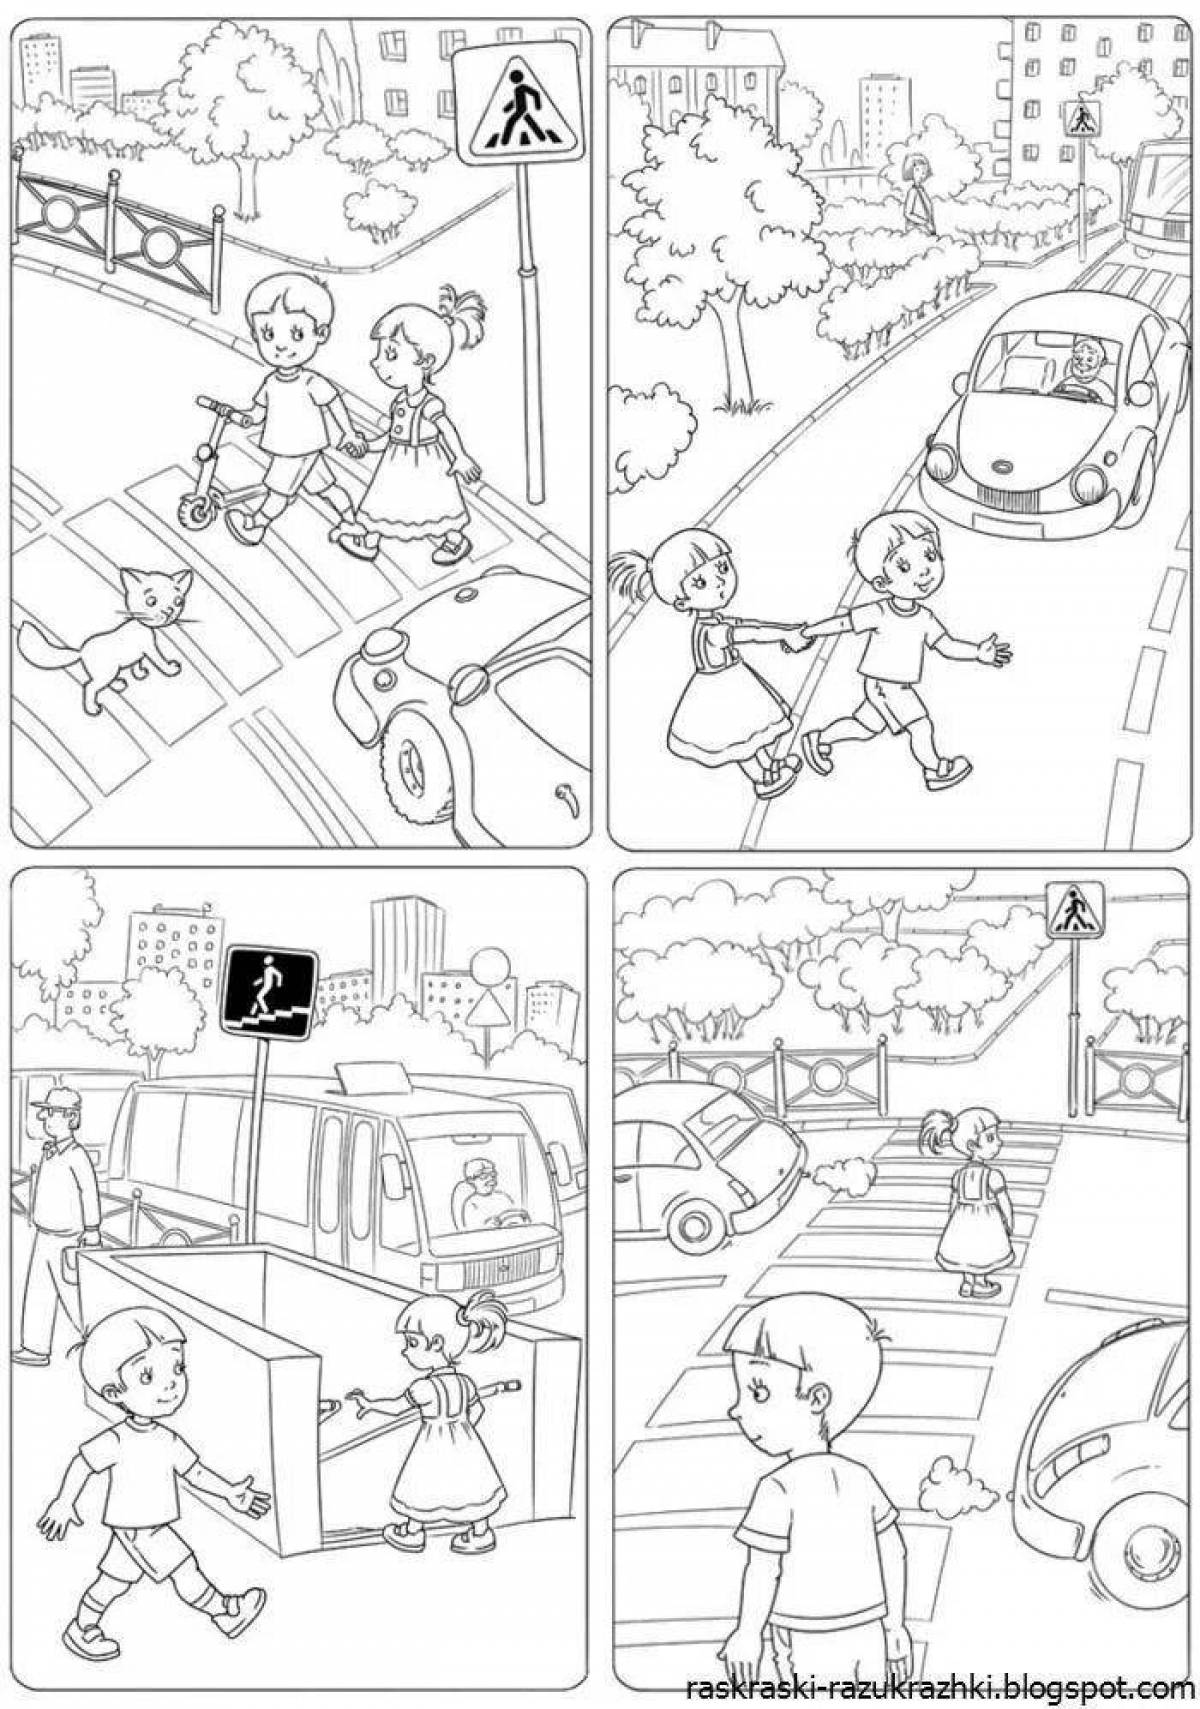 Wonderful rules of the road coloring book